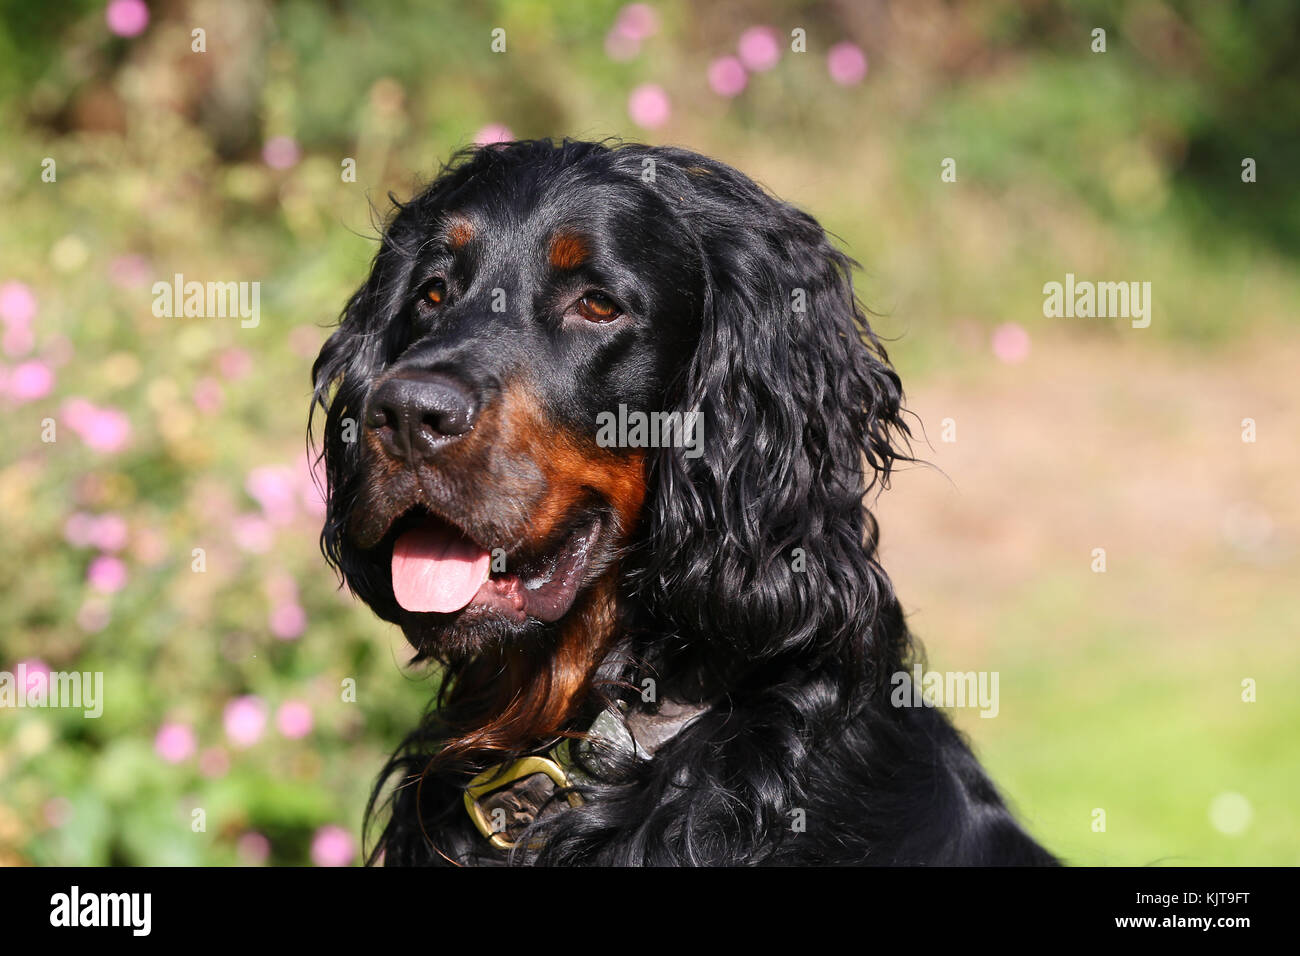 Black Tan Setter Headshot High Resolution Stock Photography And Images Alamy